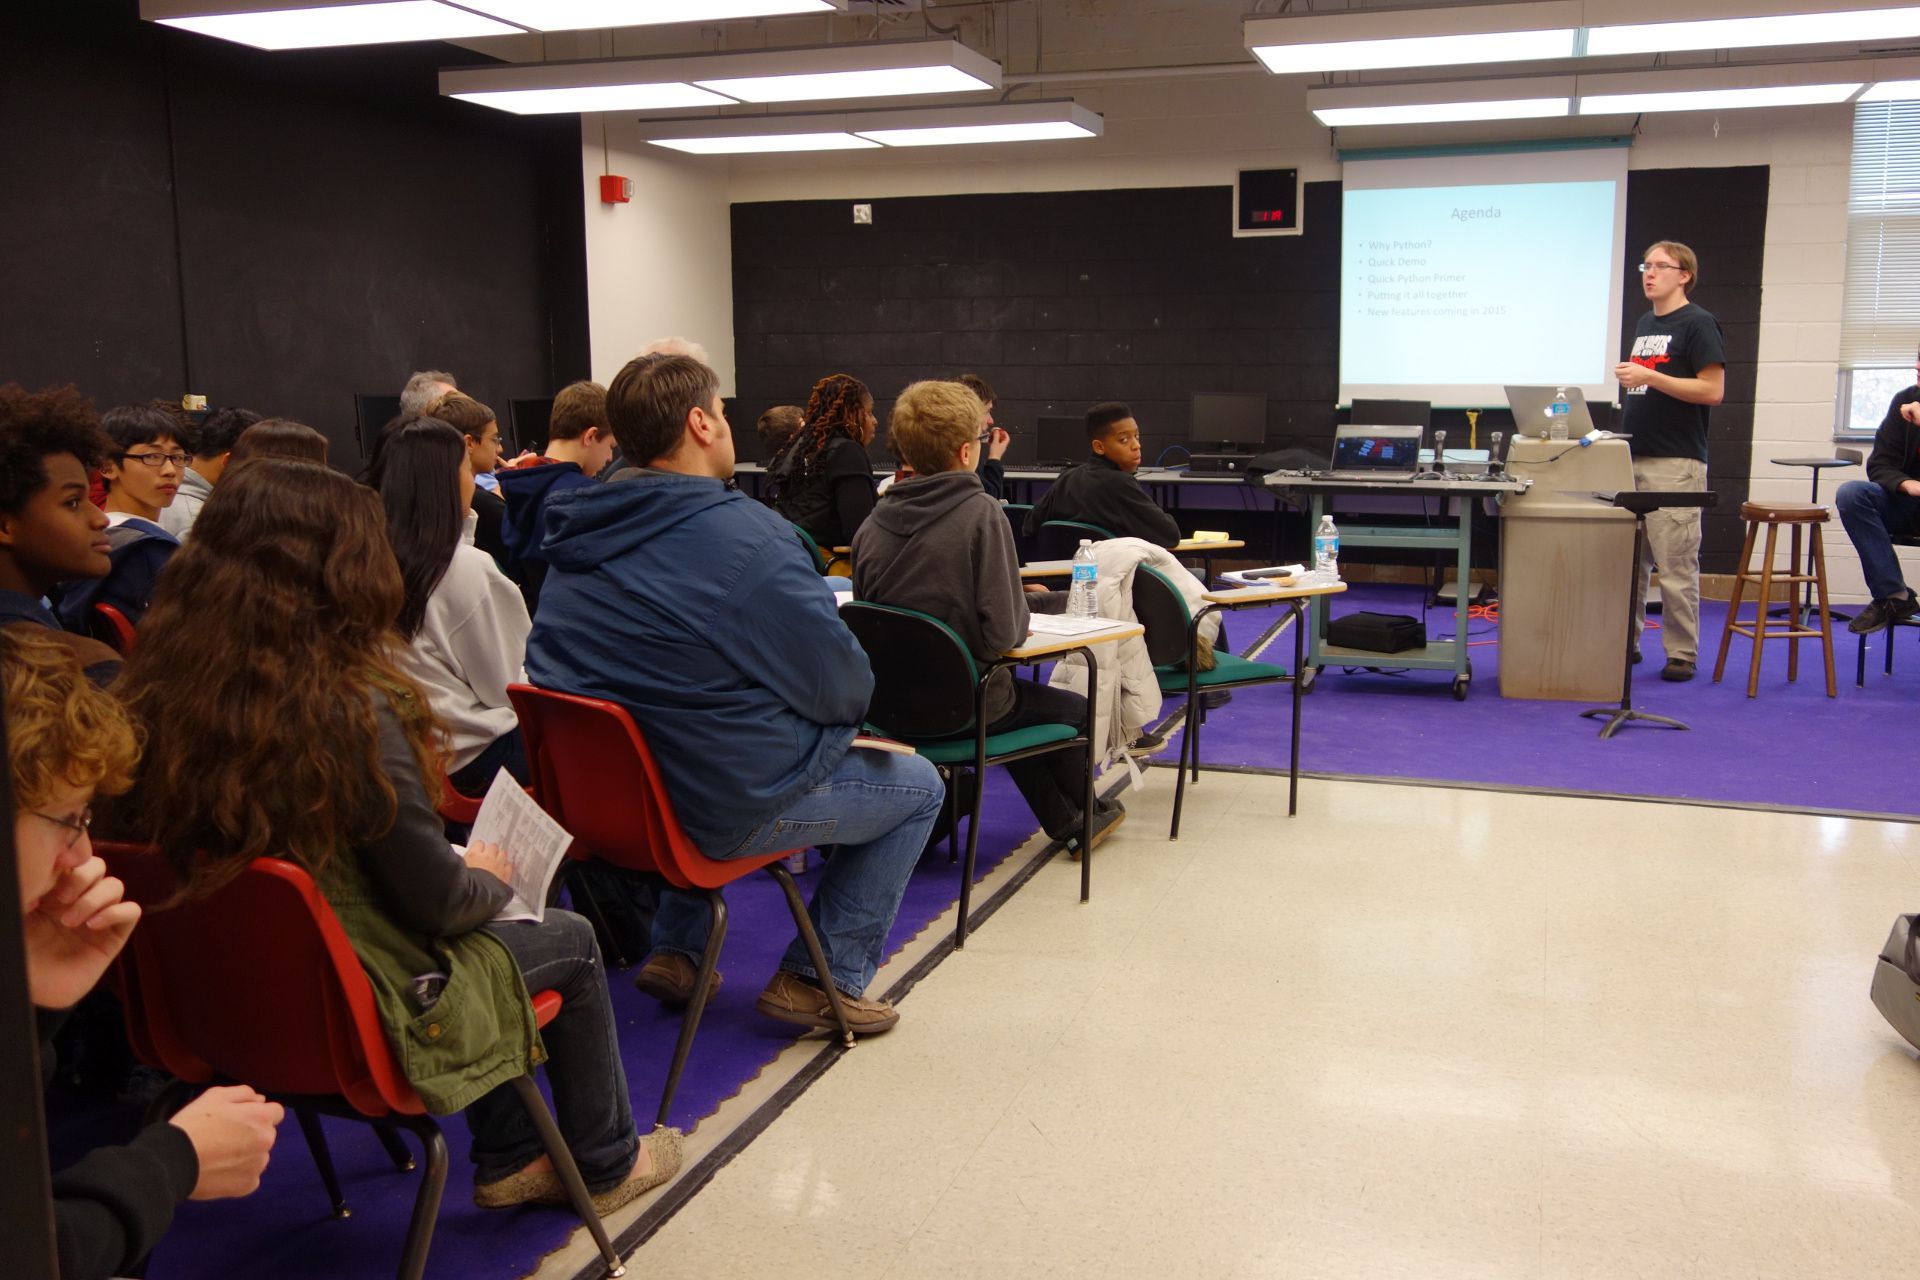 Students attending a 2015 workshop in a purple-and-black room.